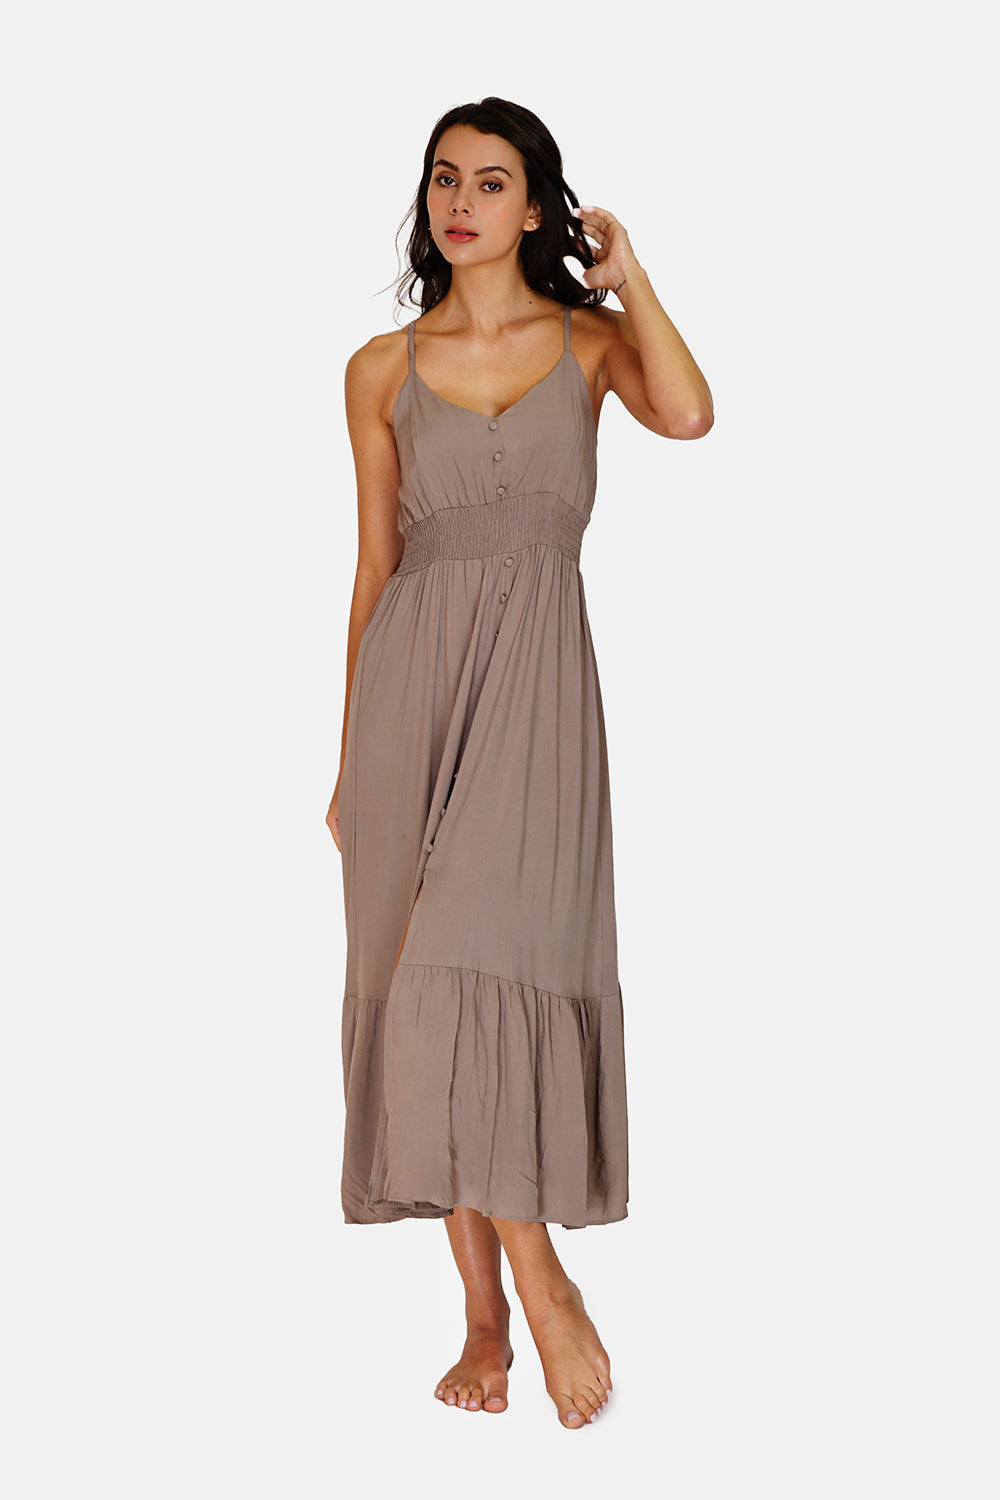 Dress with thin straps, neckline and tie at the back, lined